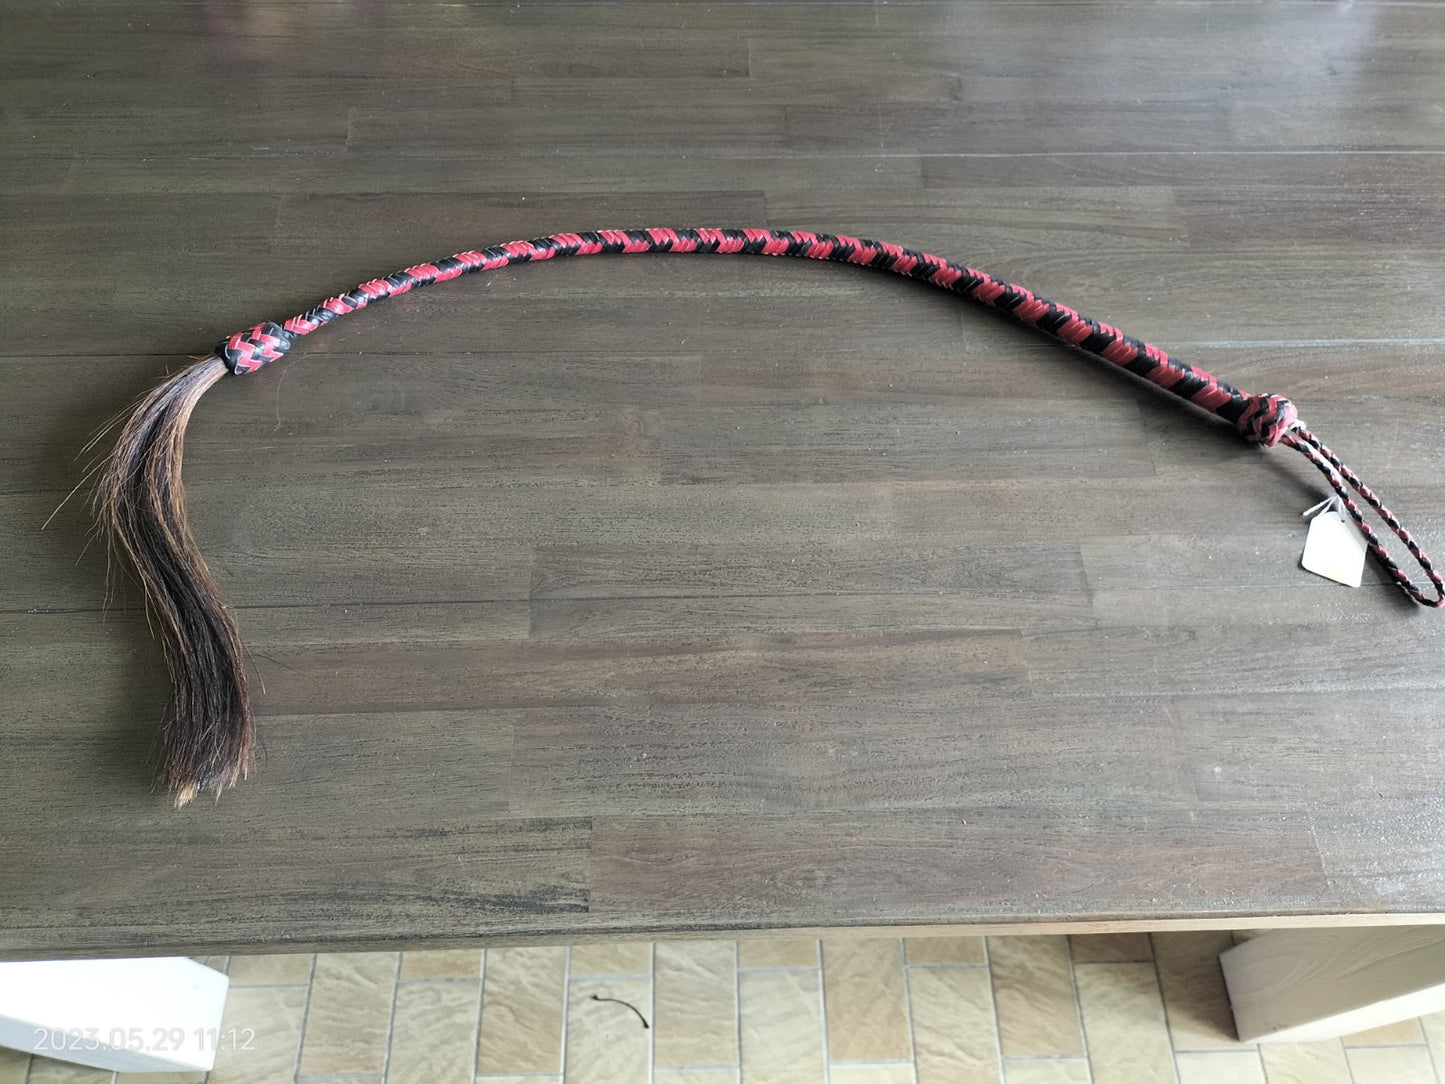 Snake whip with horsehair